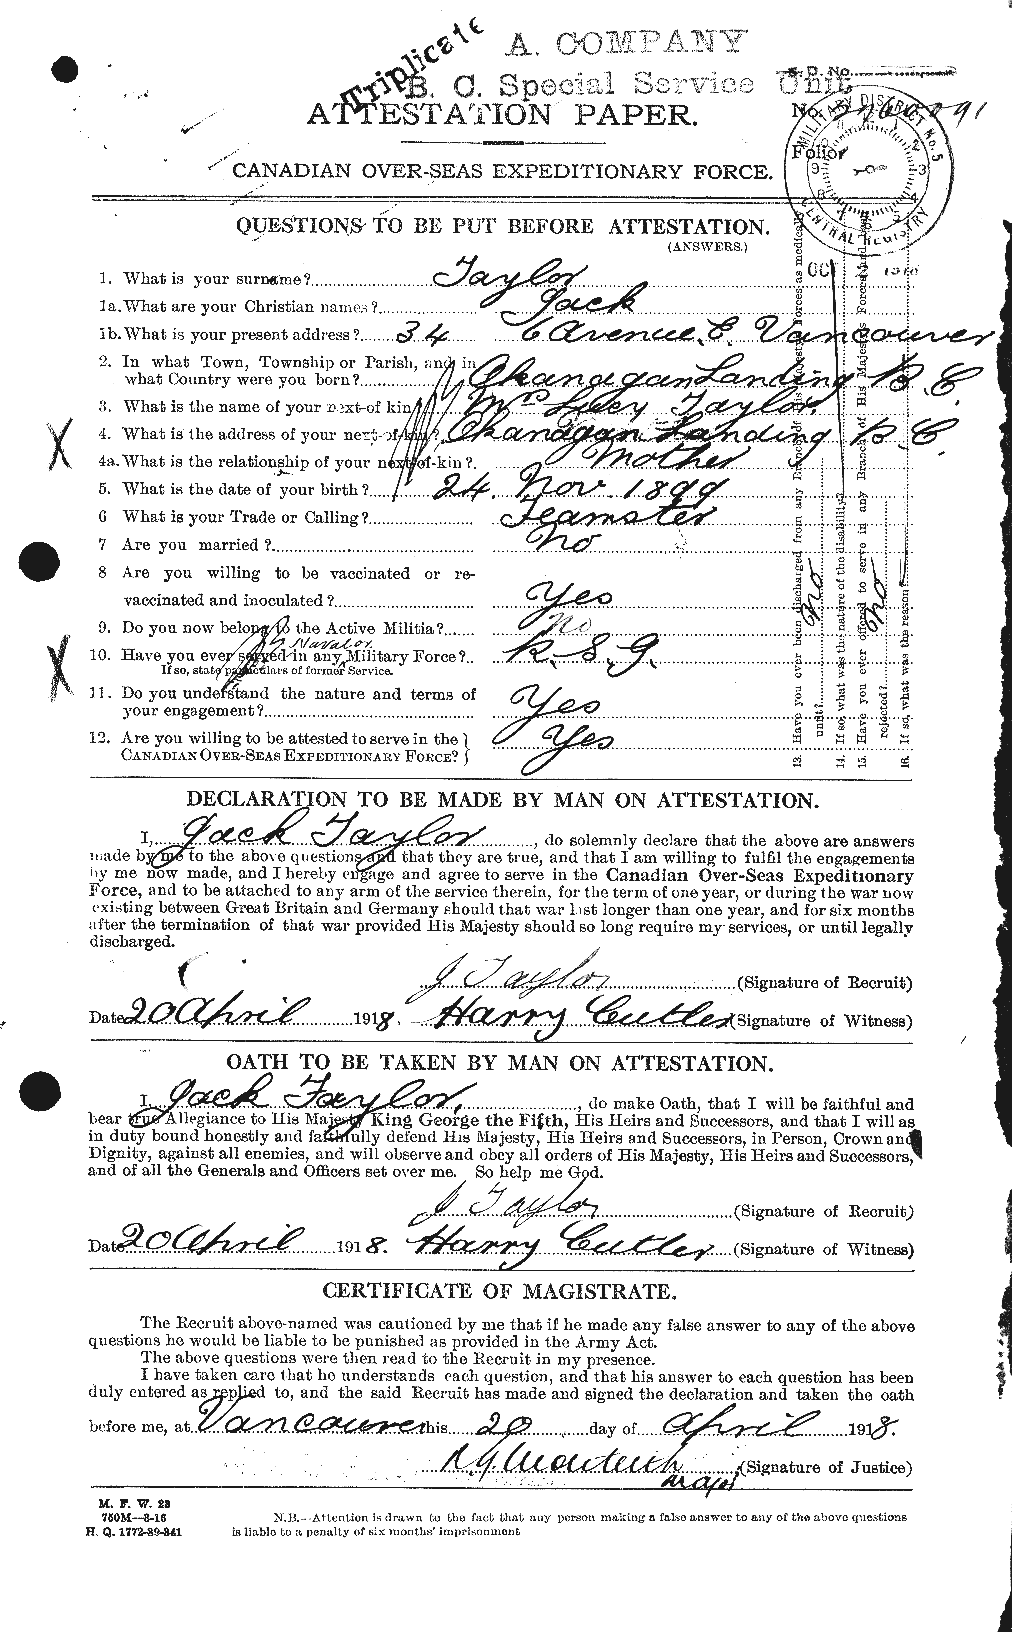 Personnel Records of the First World War - CEF 626643a